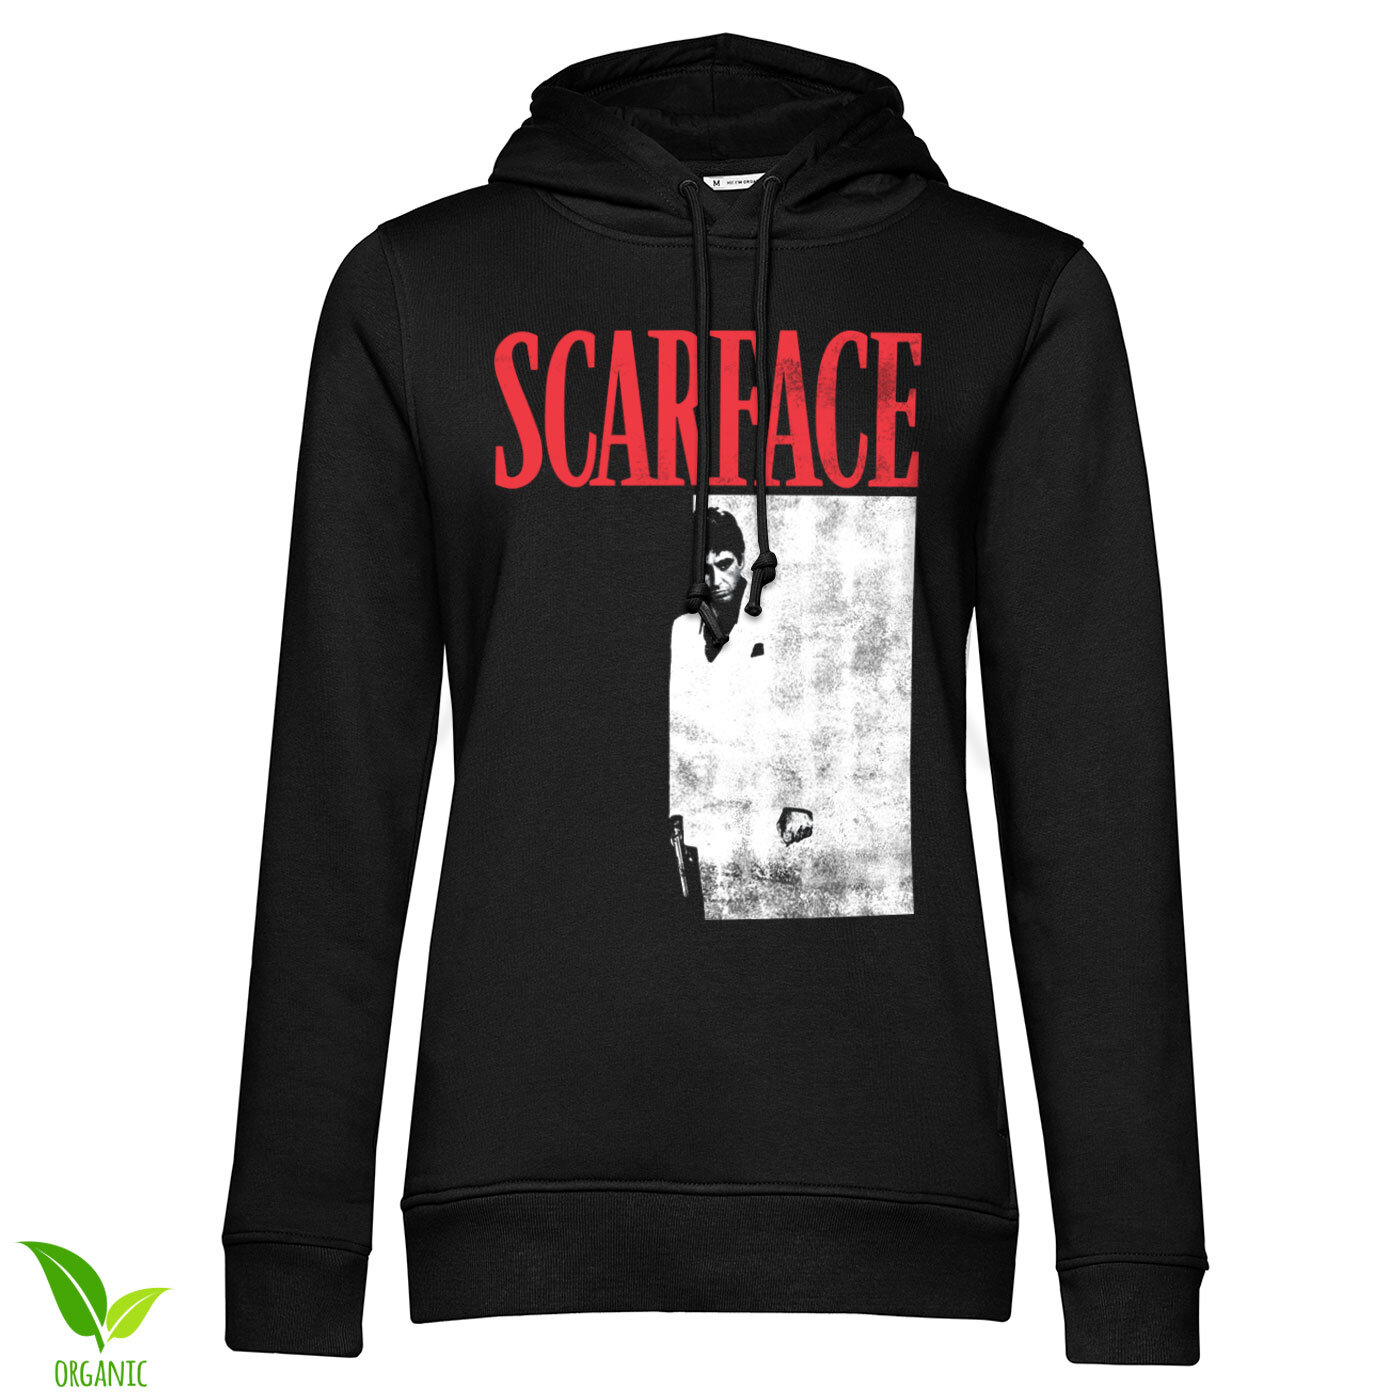 Scarface Poster Girls Hoodie